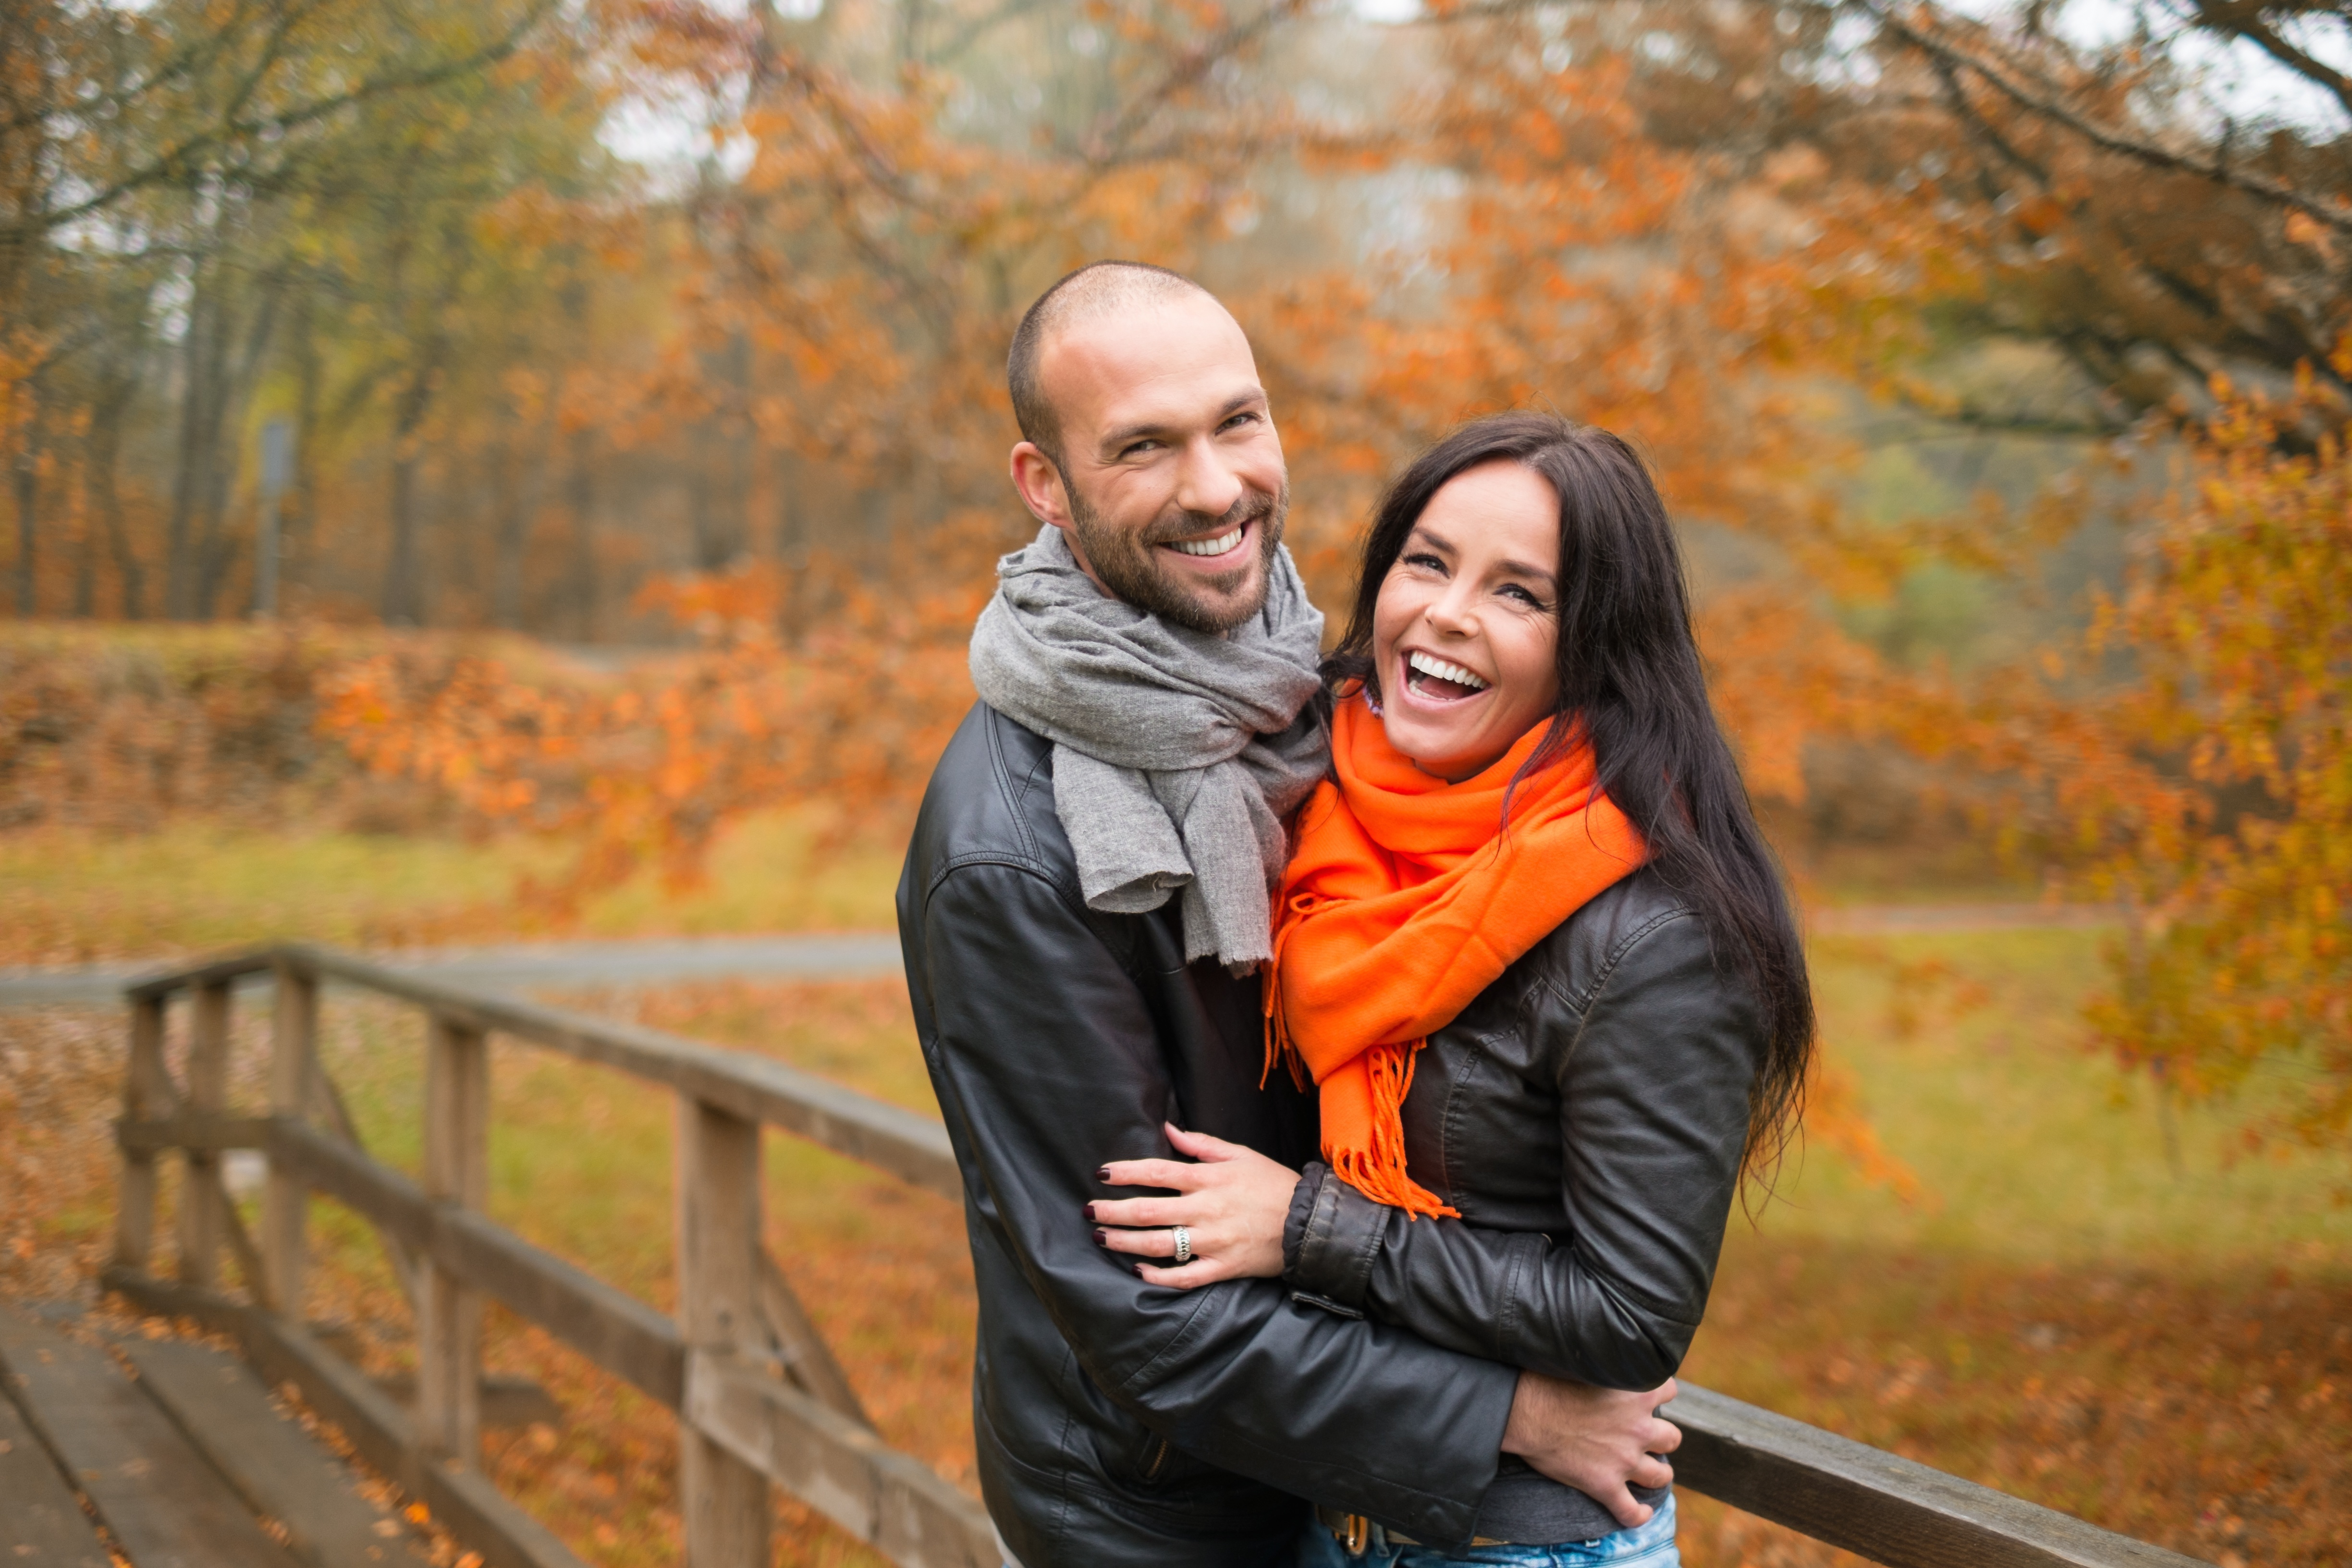 A happy couple posing outside in autumn | Source: Shutterstock